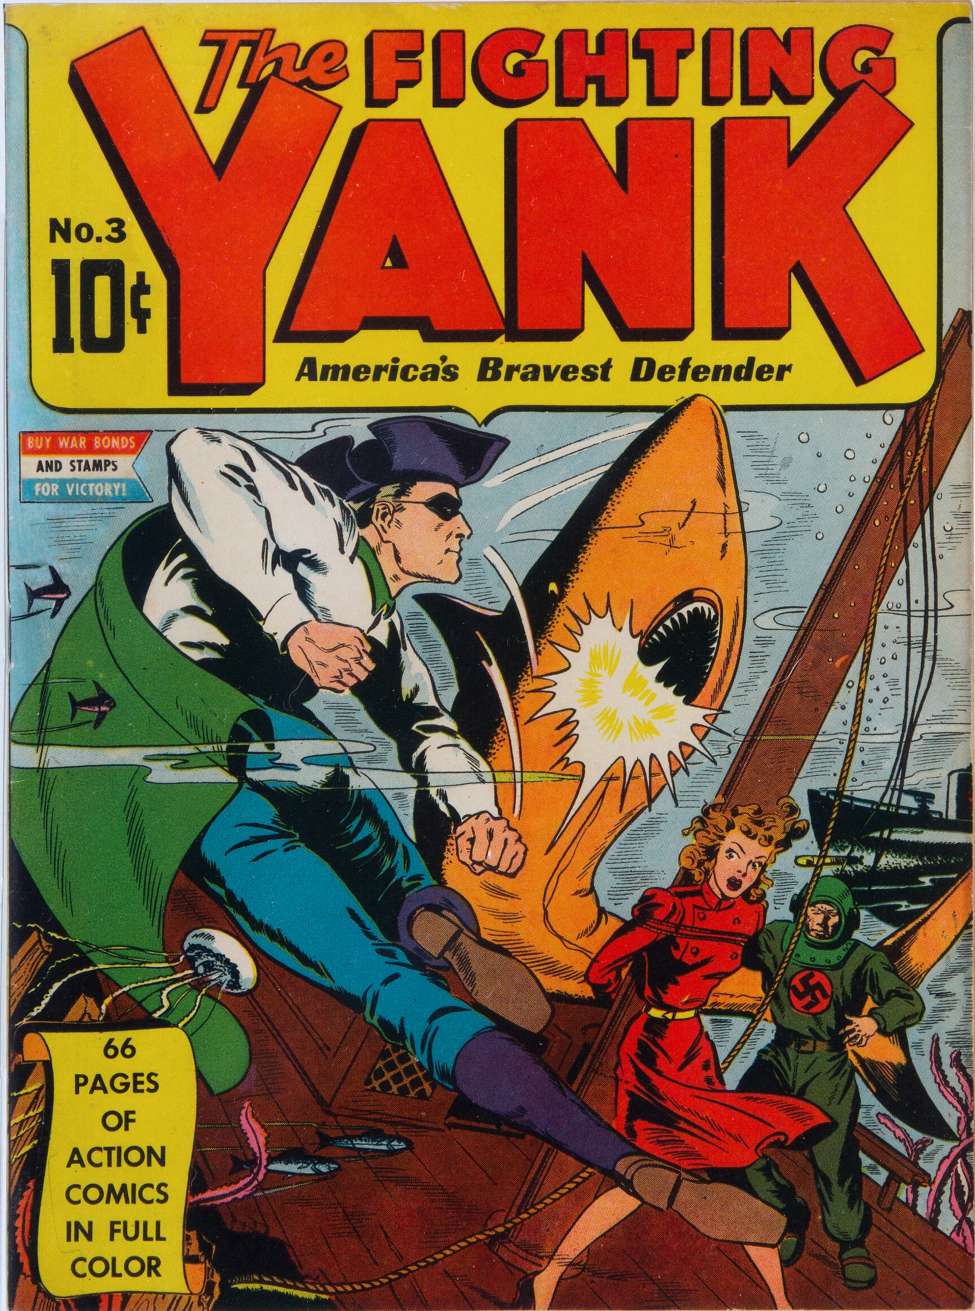 Book Cover For The Fighting Yank 3 - Version 2